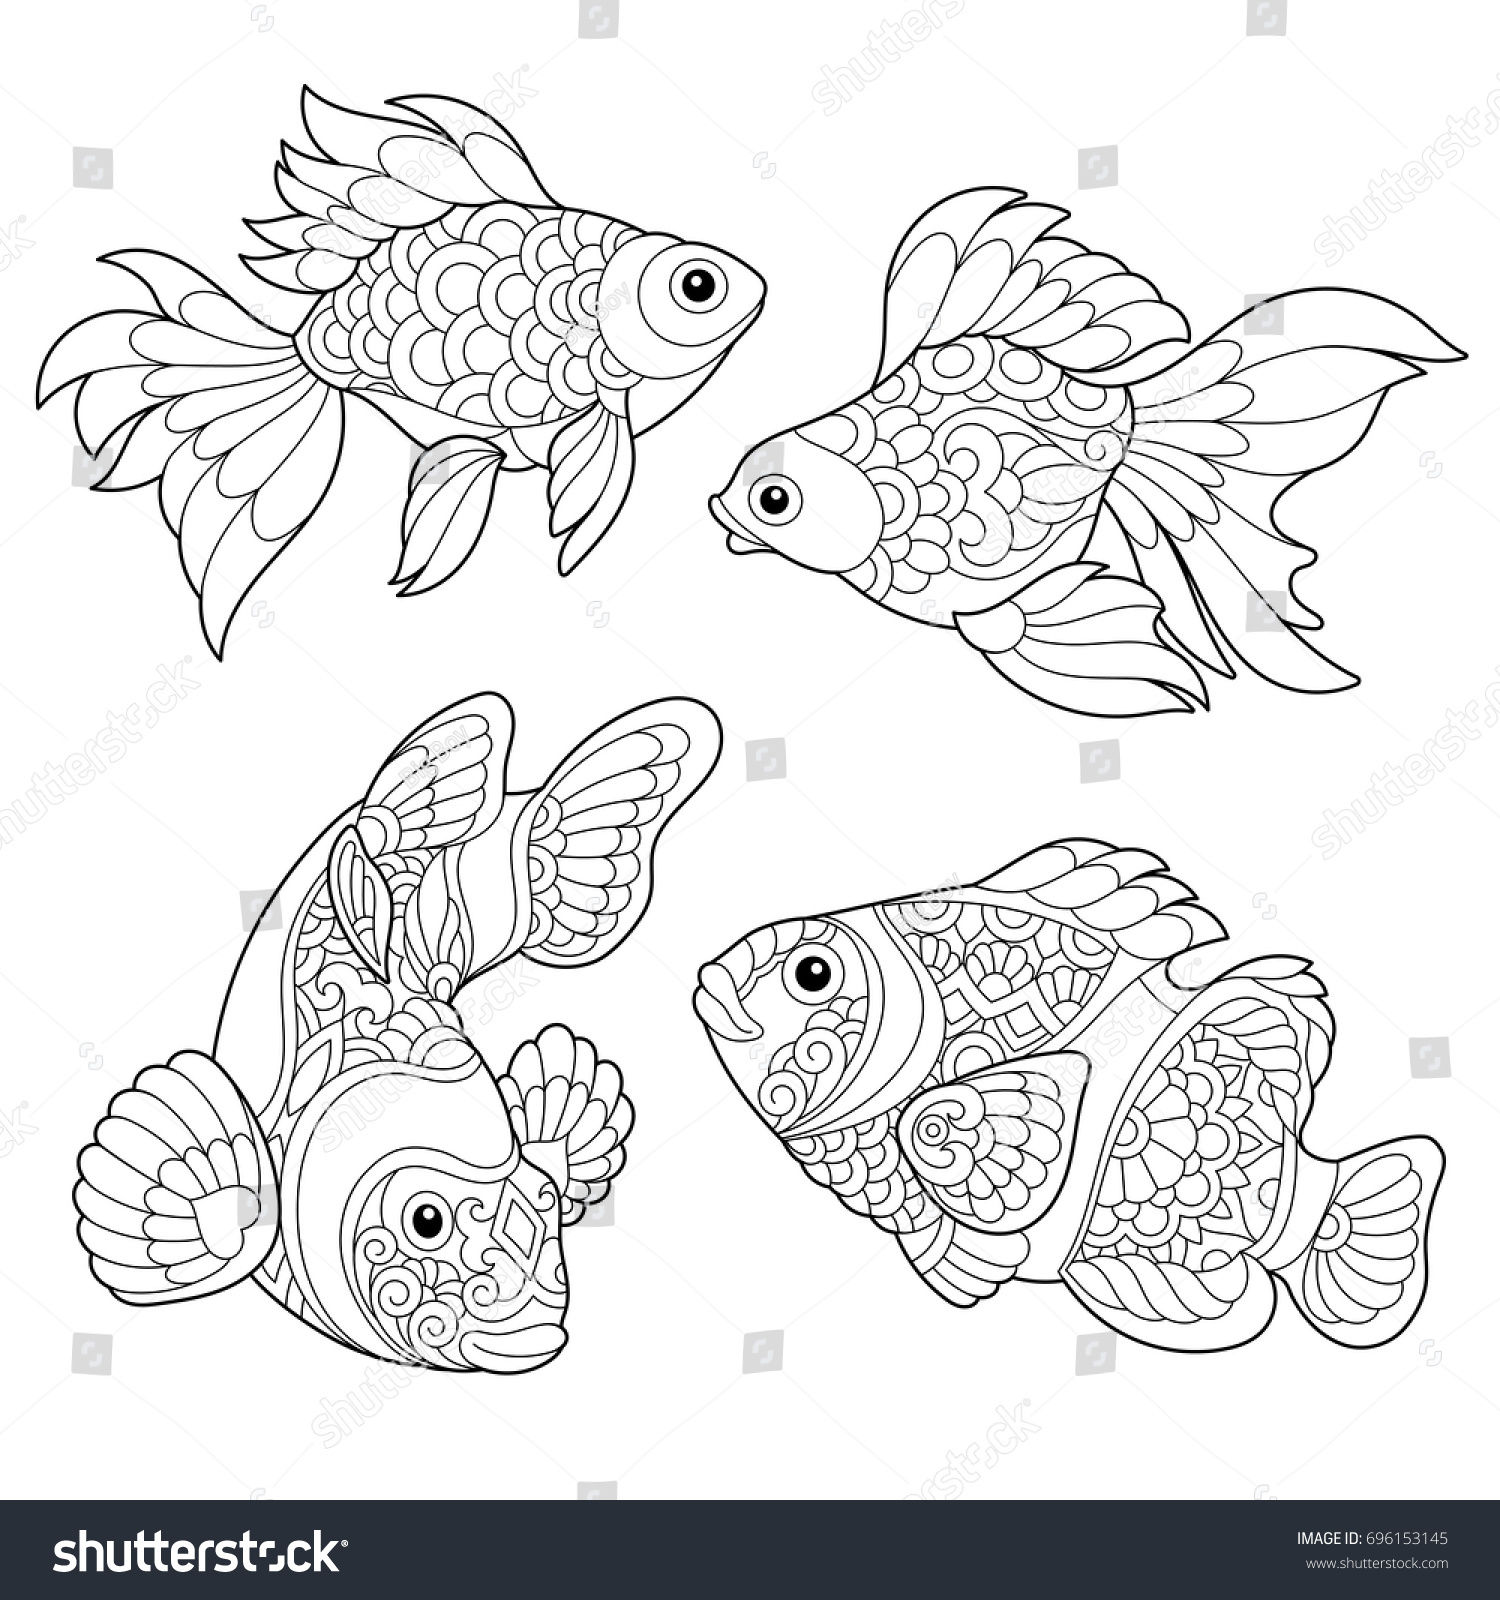 Coloring page of goldfish and clown fish Freehand sketch drawing for adult antistress coloring book